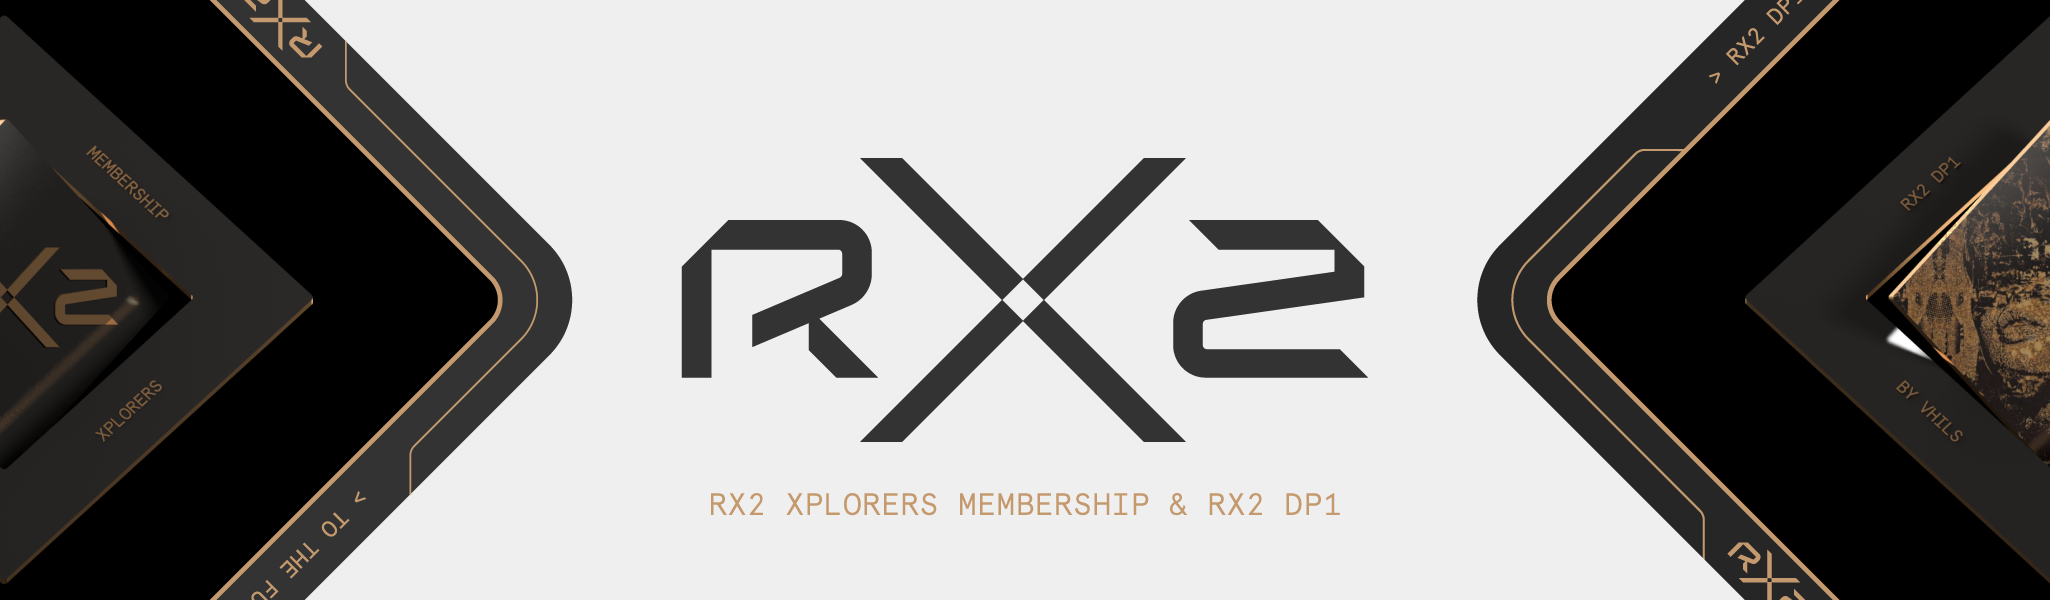 221 RX2 Membership Collection by RX2